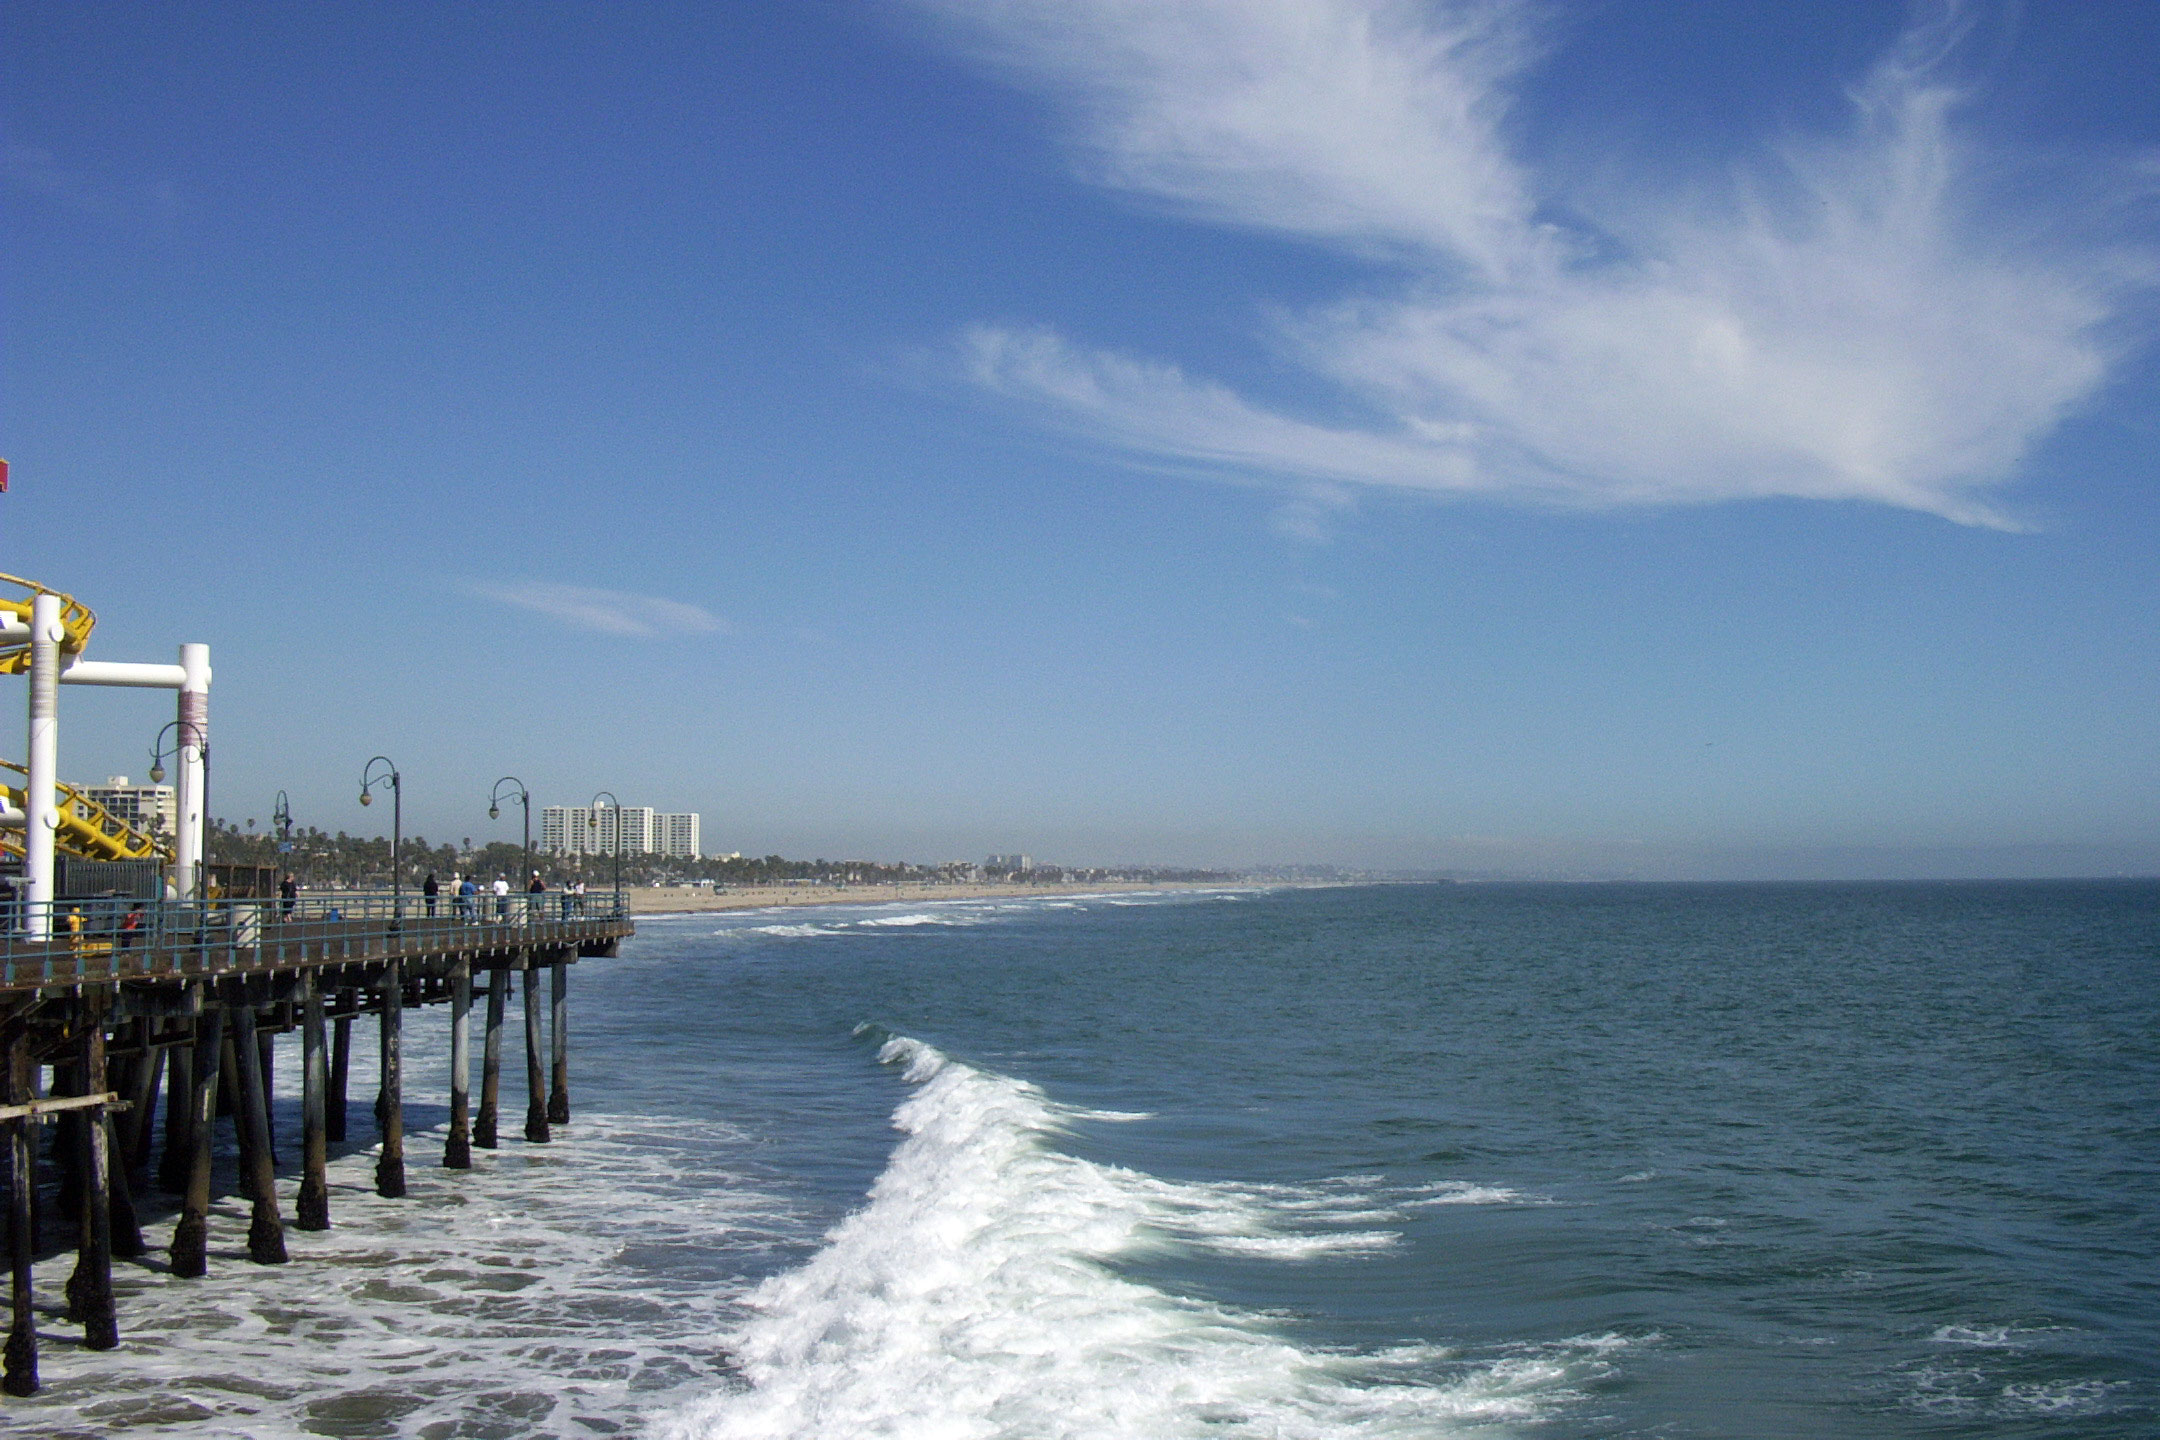 Venice Beach is located within the urban region of western Los Angeles County known as the Westside.